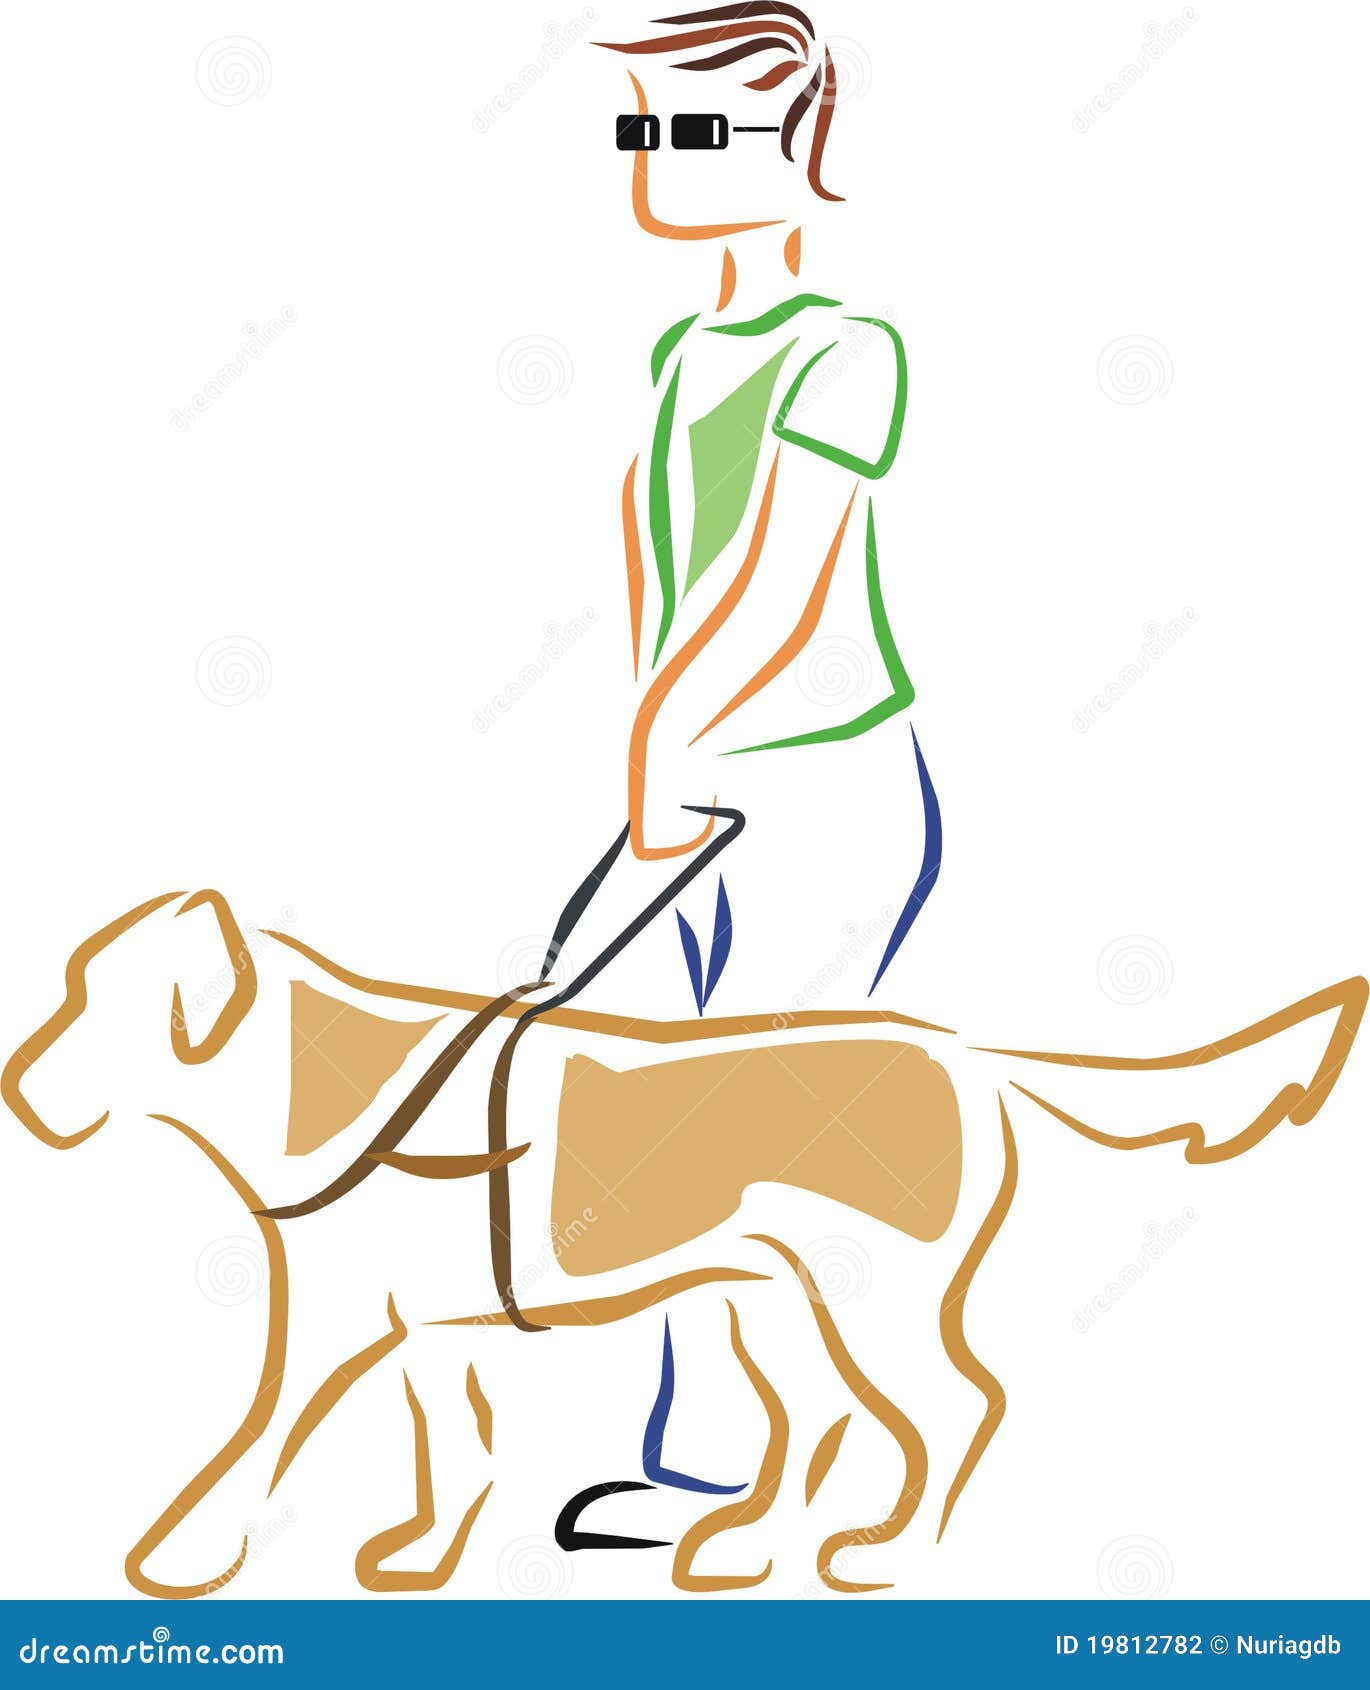 clipart guide dog - photo #4